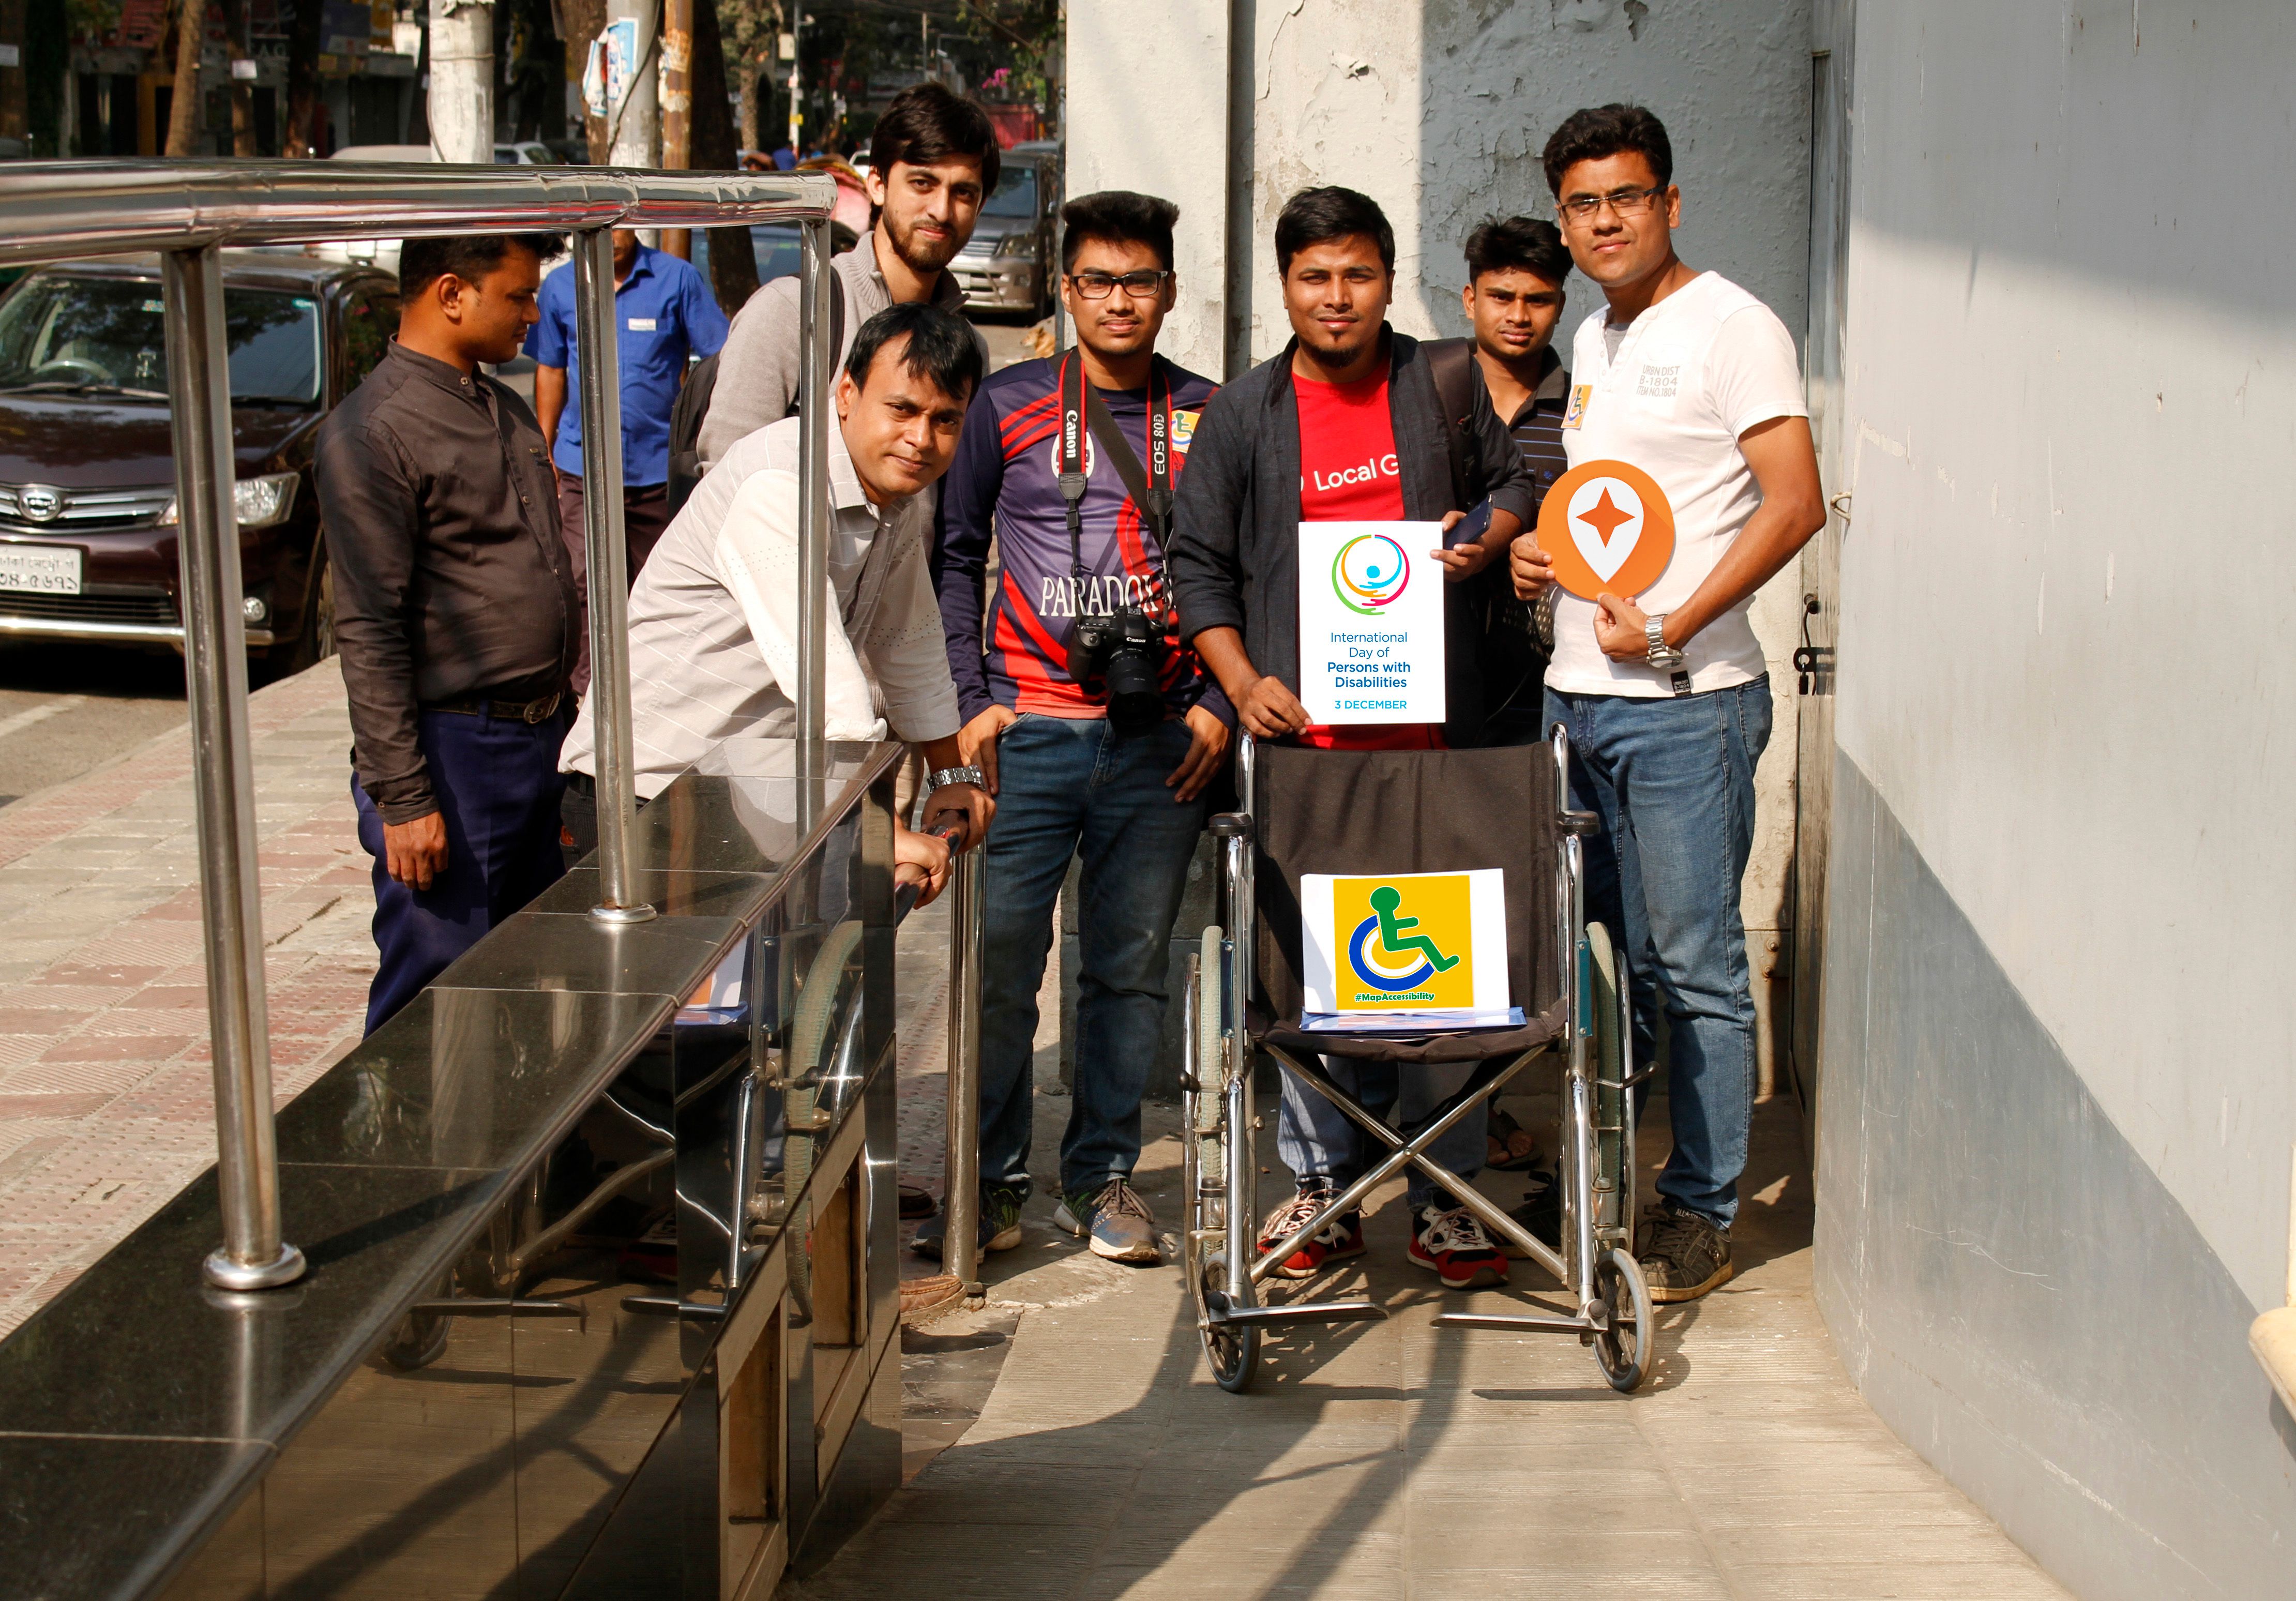 Group photo in front of the ramp